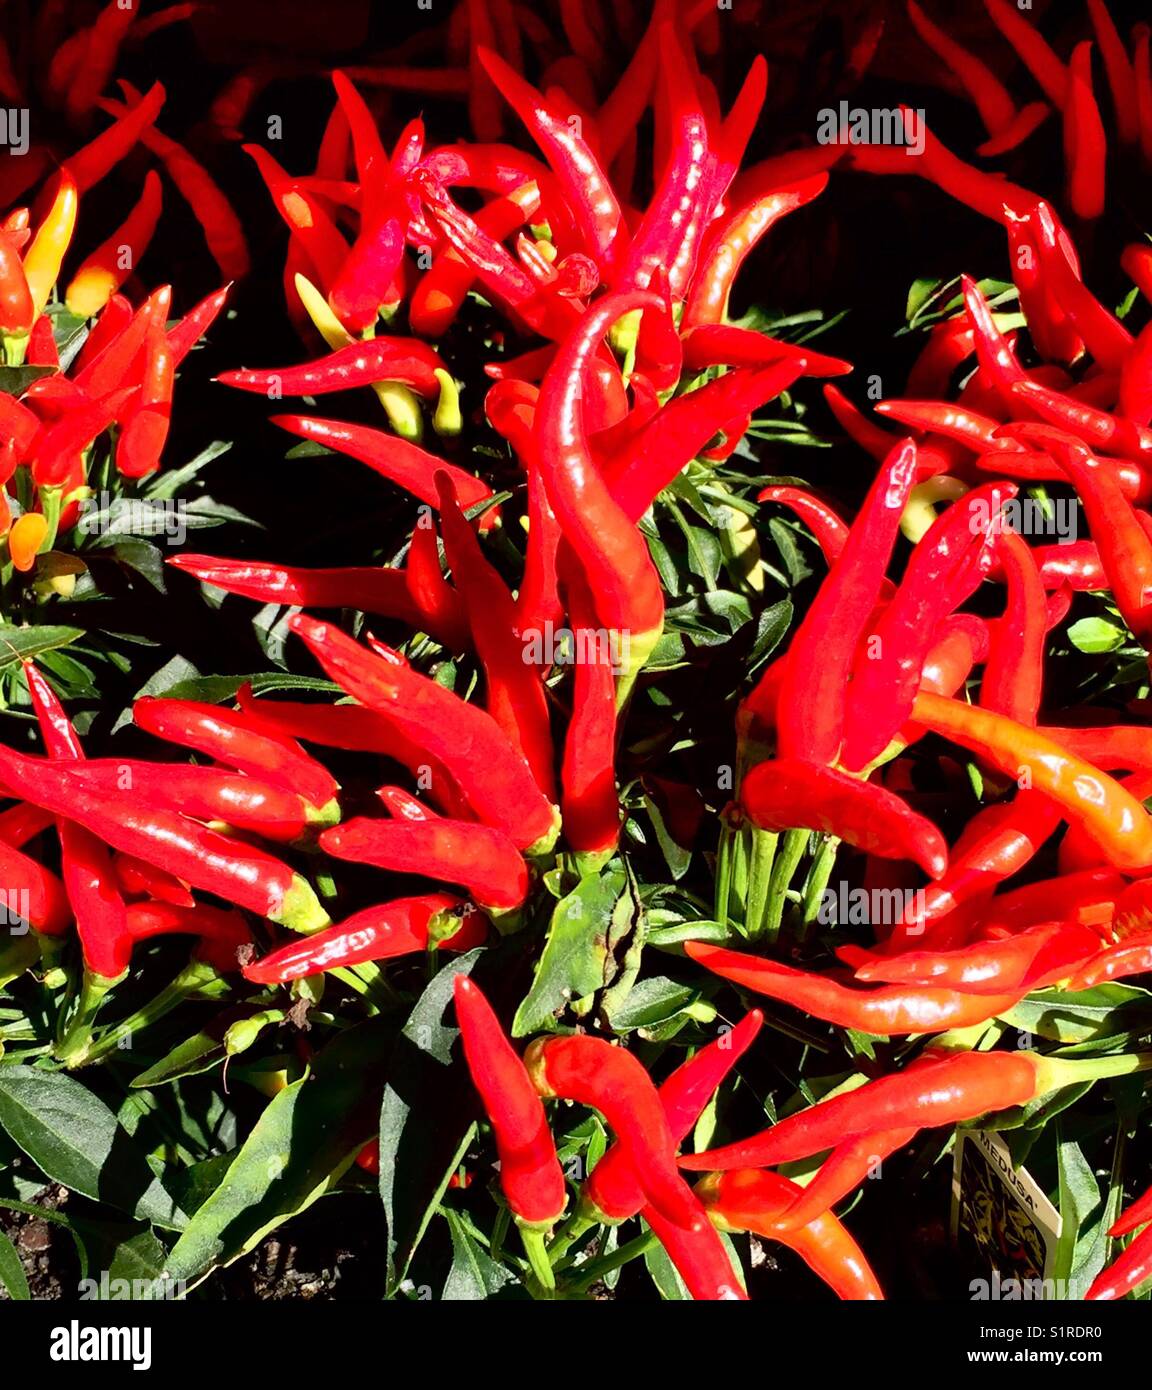 Sun drenched radiant red (a few white) ornamental peppers Stock Photo